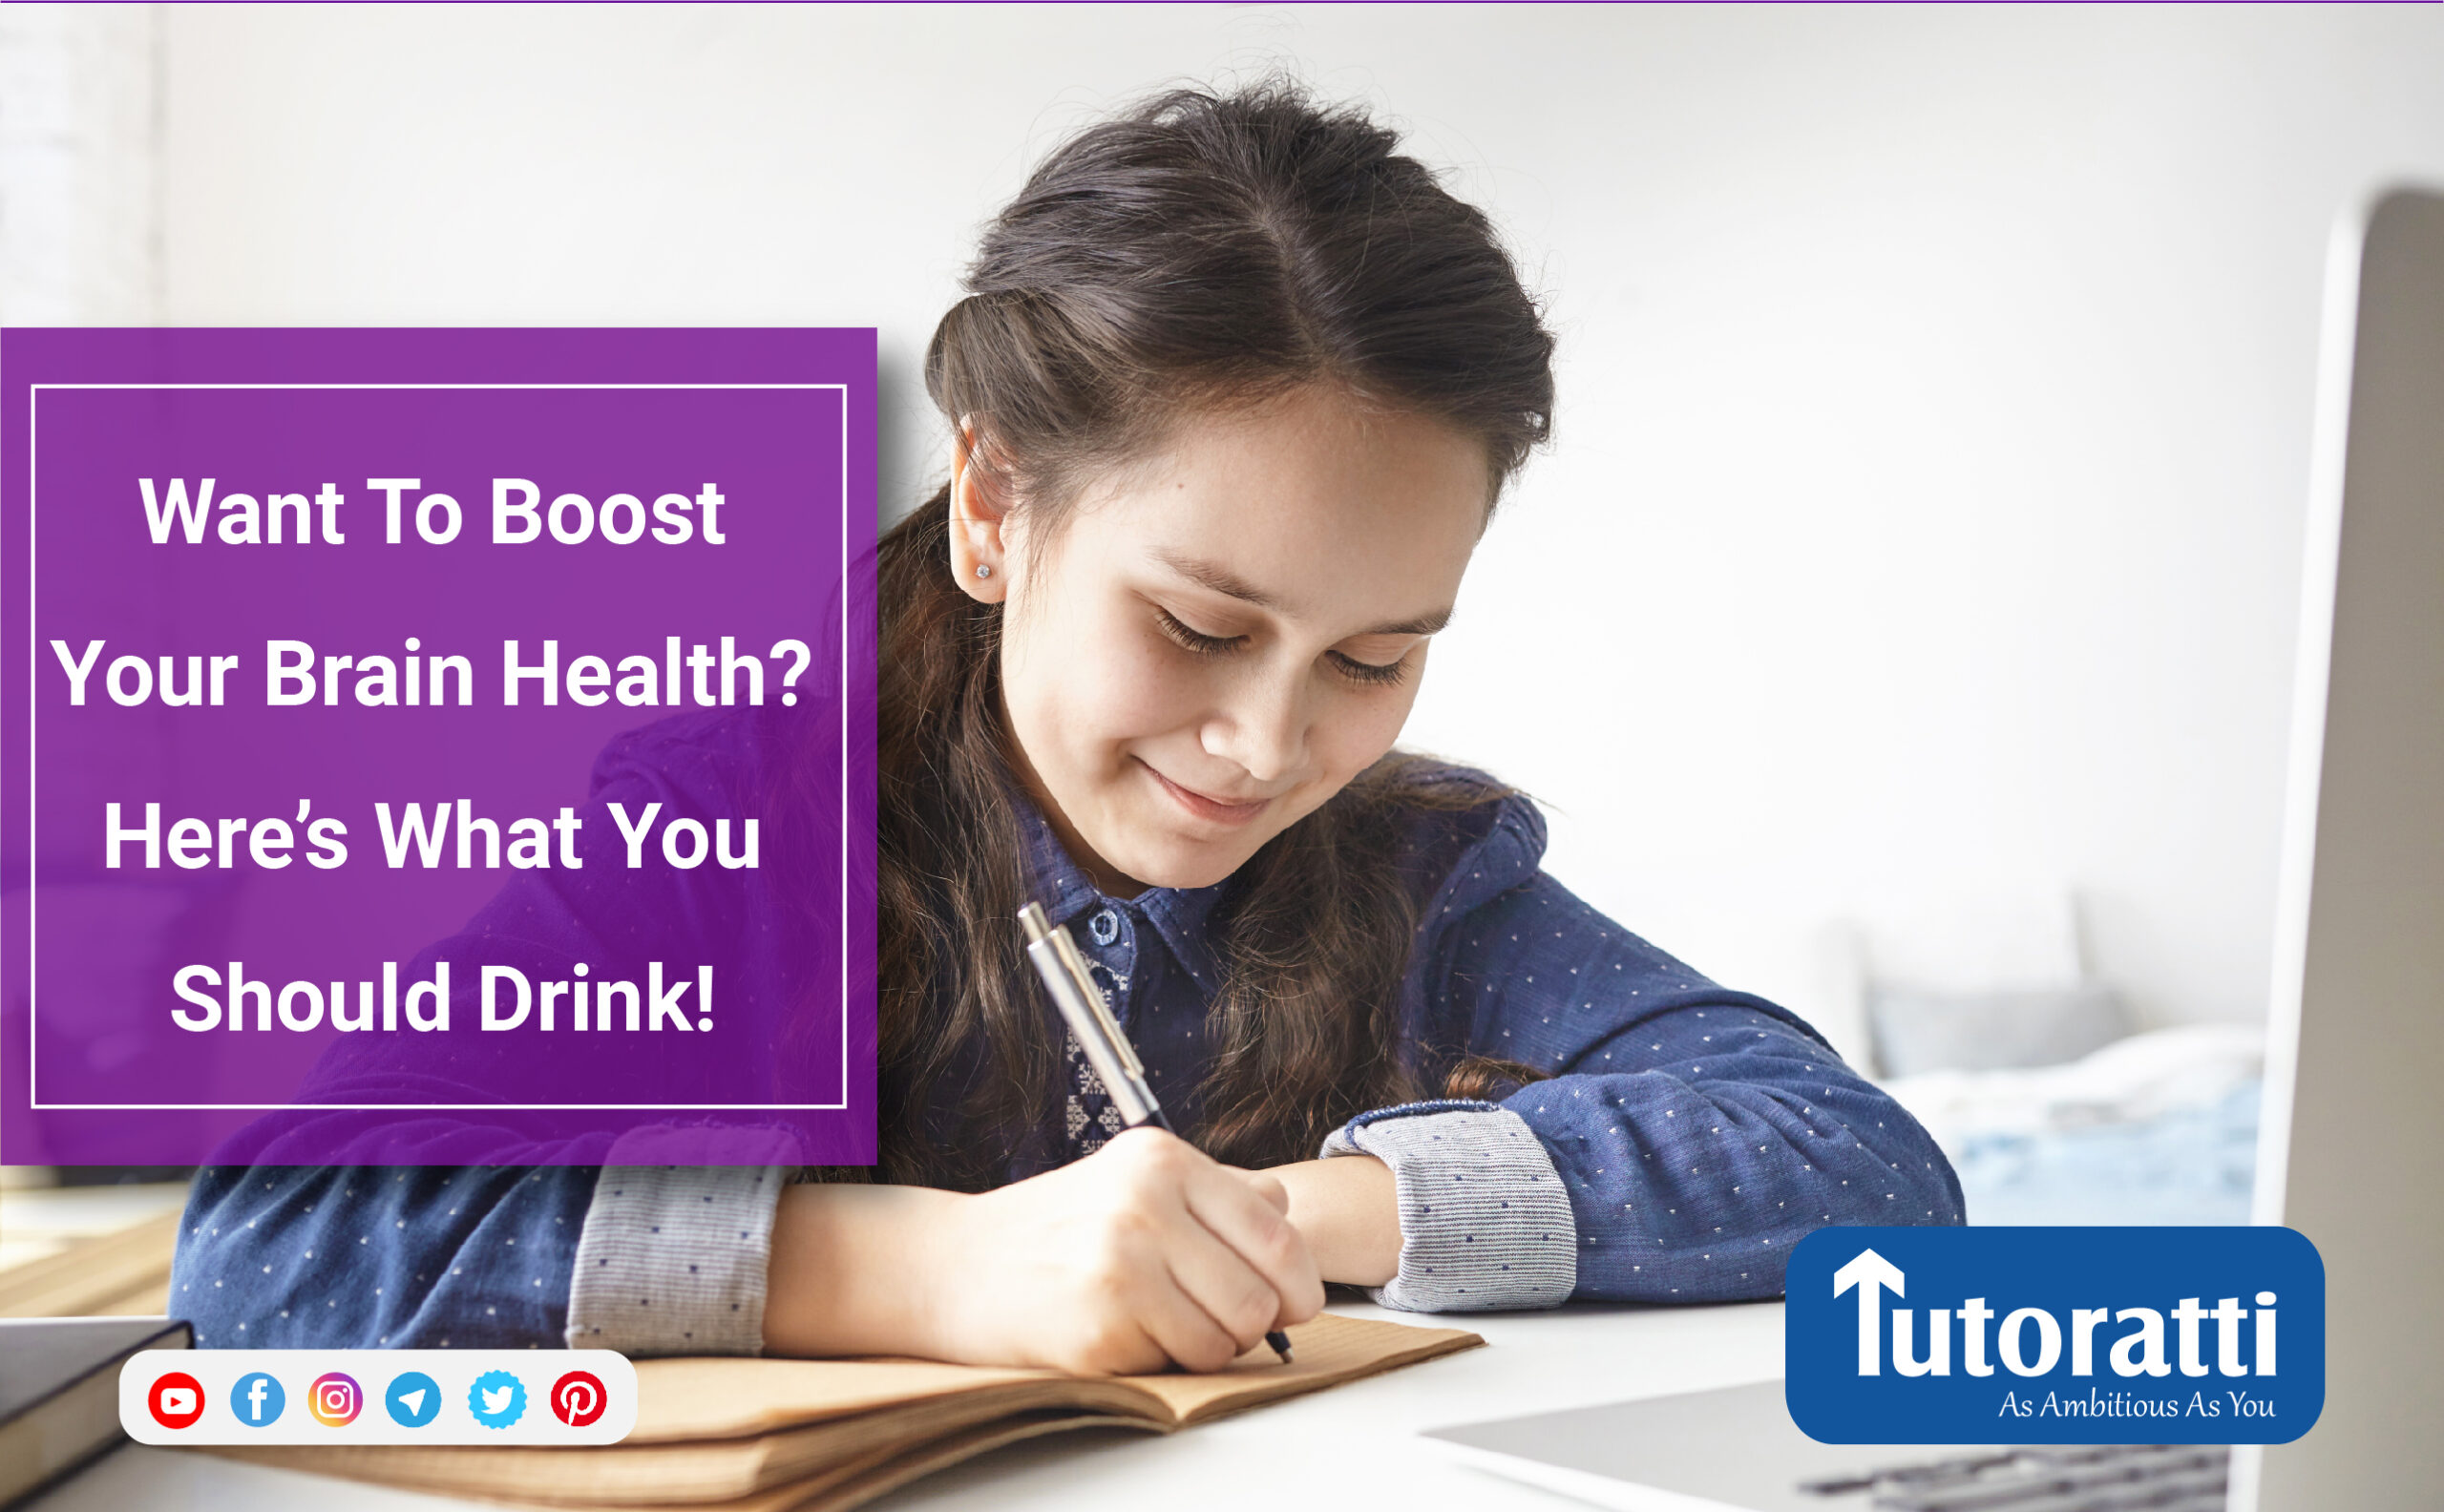 Want to boost your brain health? Here’s What You Should Drink!